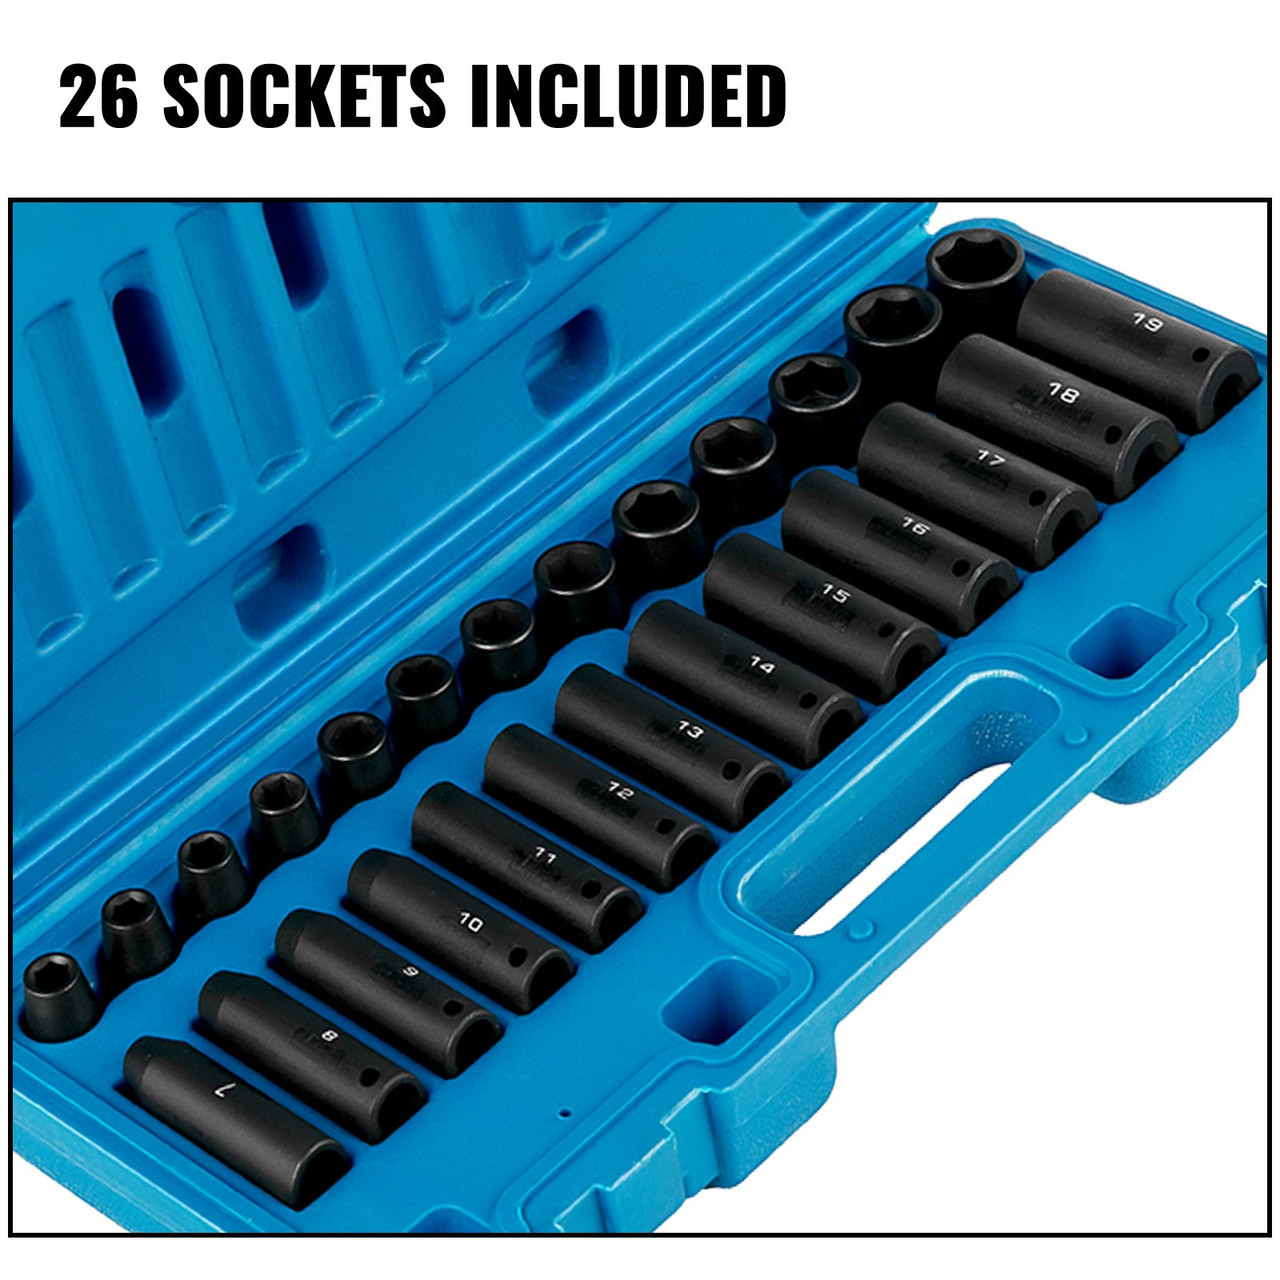 Impact Socket Set 3/8 Inches 26 Piece Impact Sockets, Deep / Standard Socket, 6-Point Sockets, Rugged Construction, Cr-V Socket Set Impact Metric 9mm - 30mm, with a Storage Cage